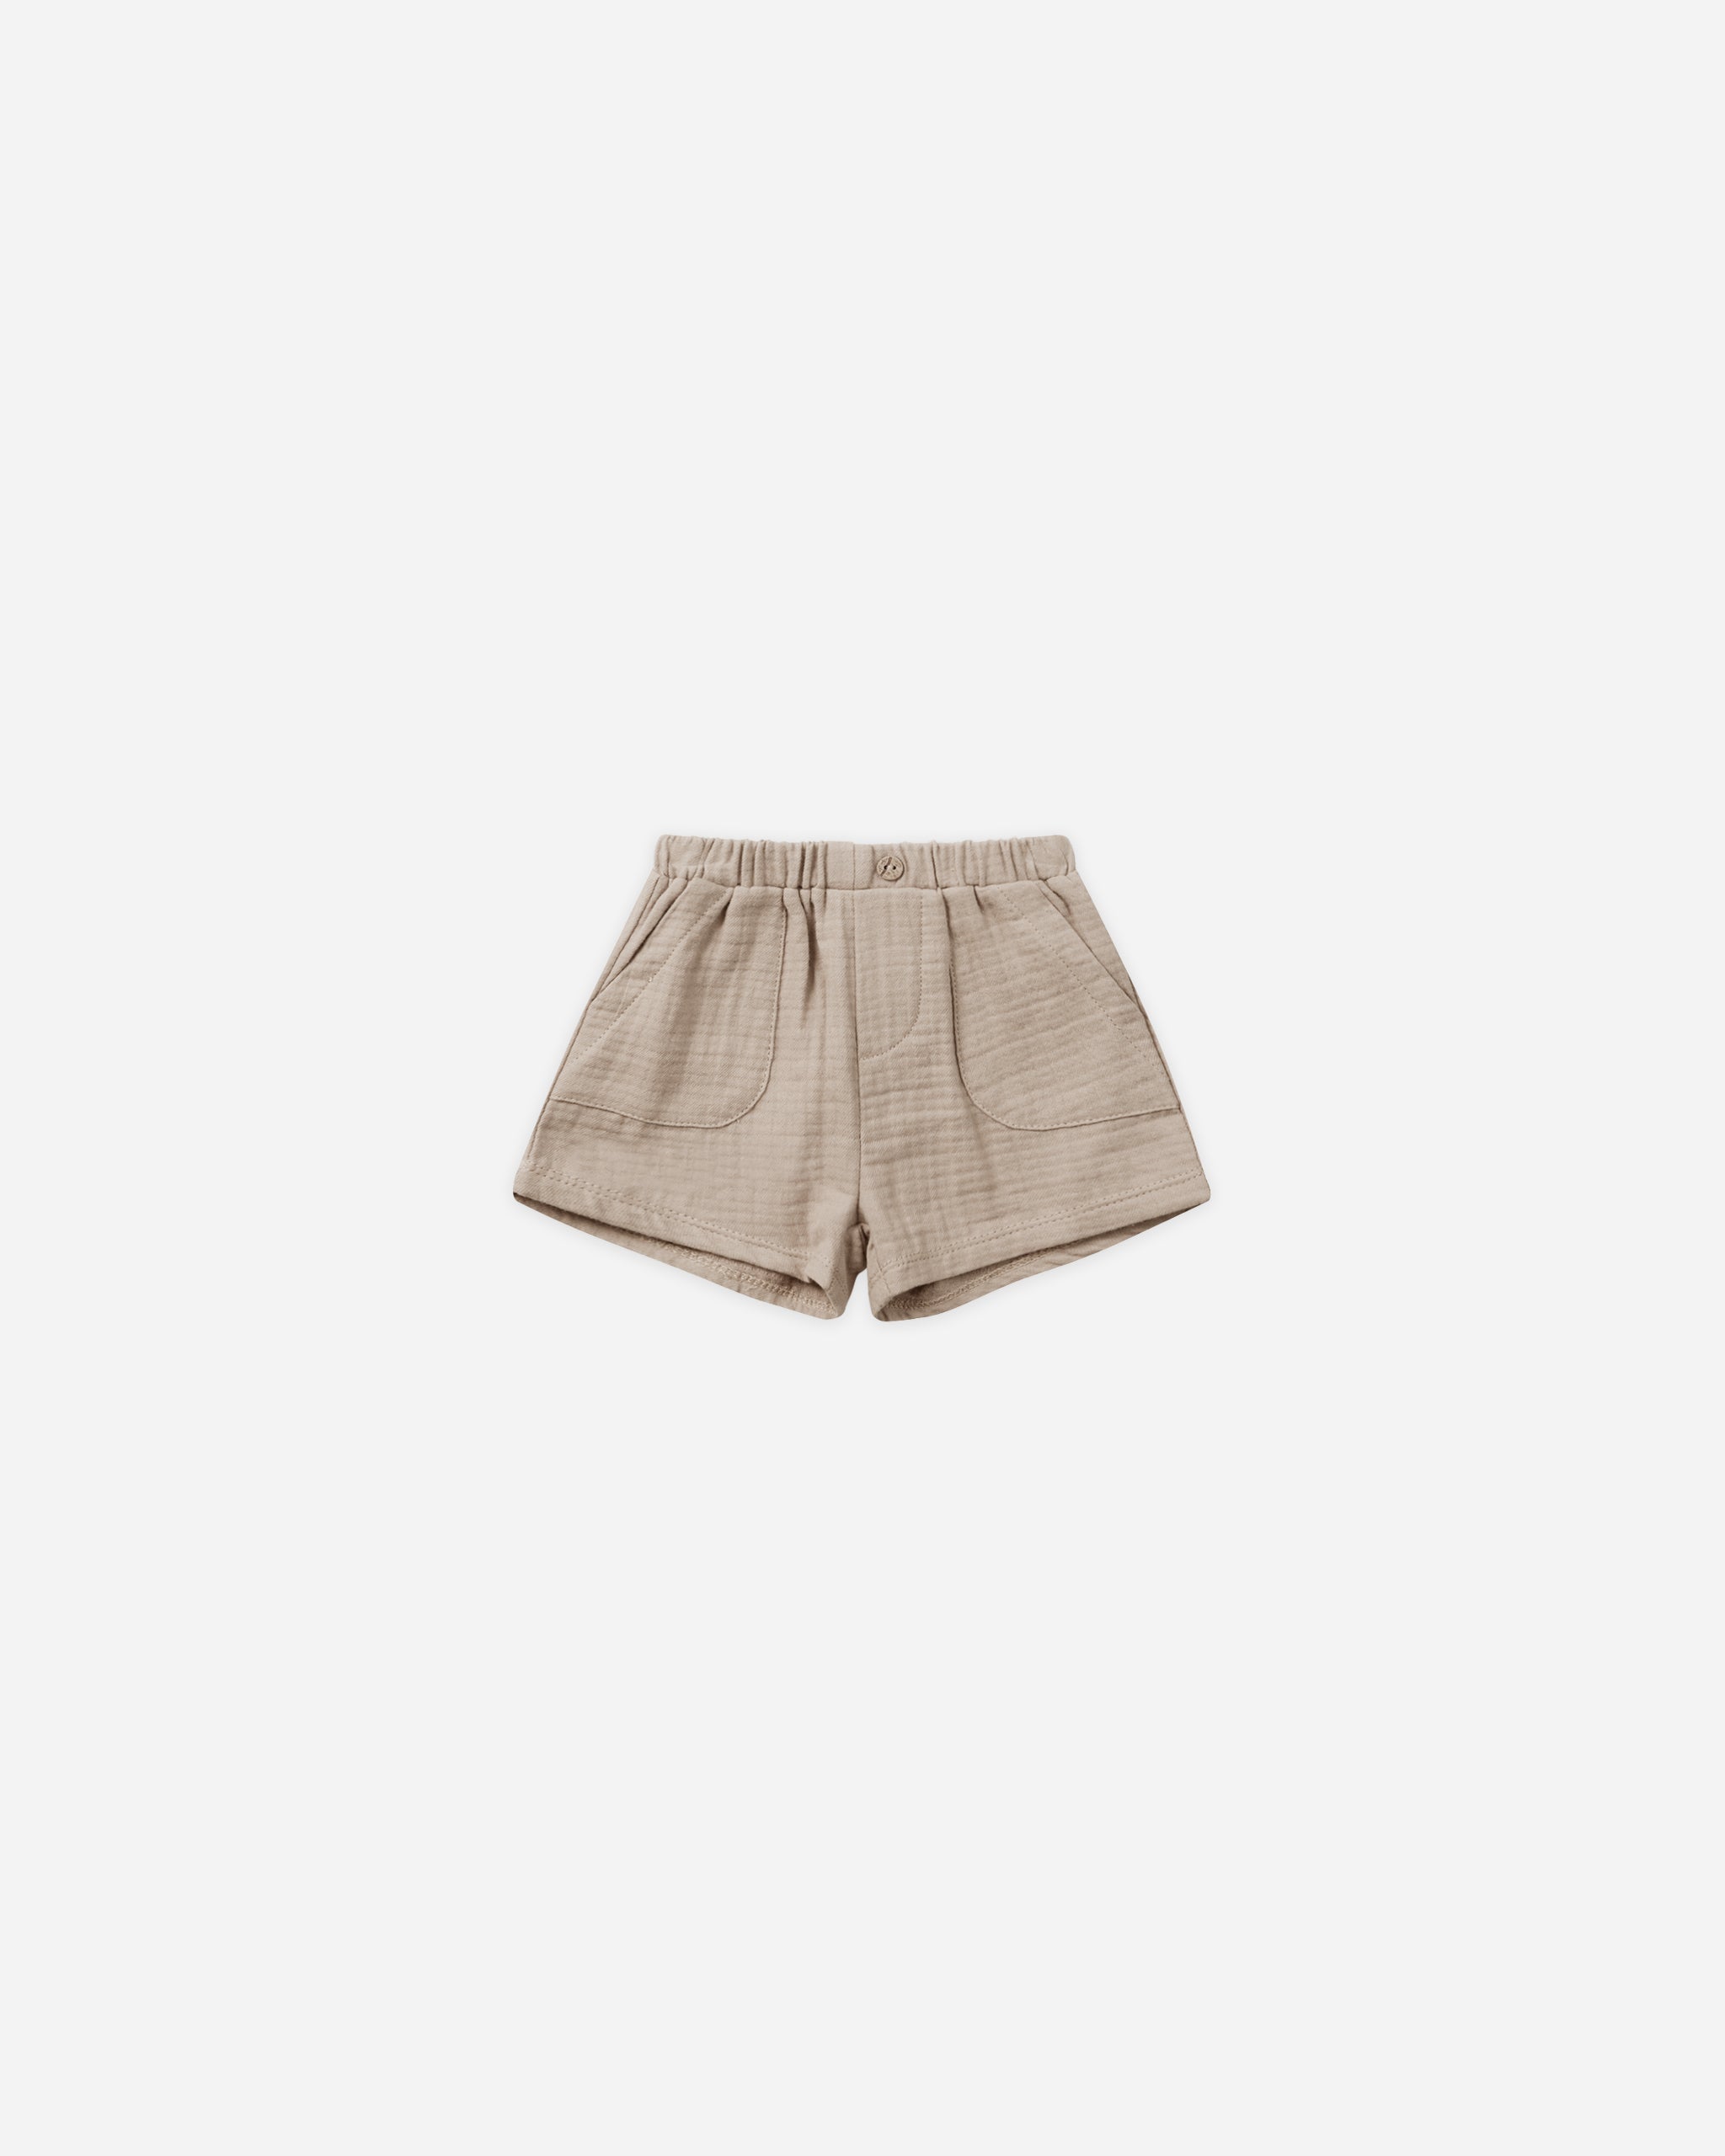 Utility Short || Oat - Rylee + Cru | Kids Clothes | Trendy Baby Clothes | Modern Infant Outfits |